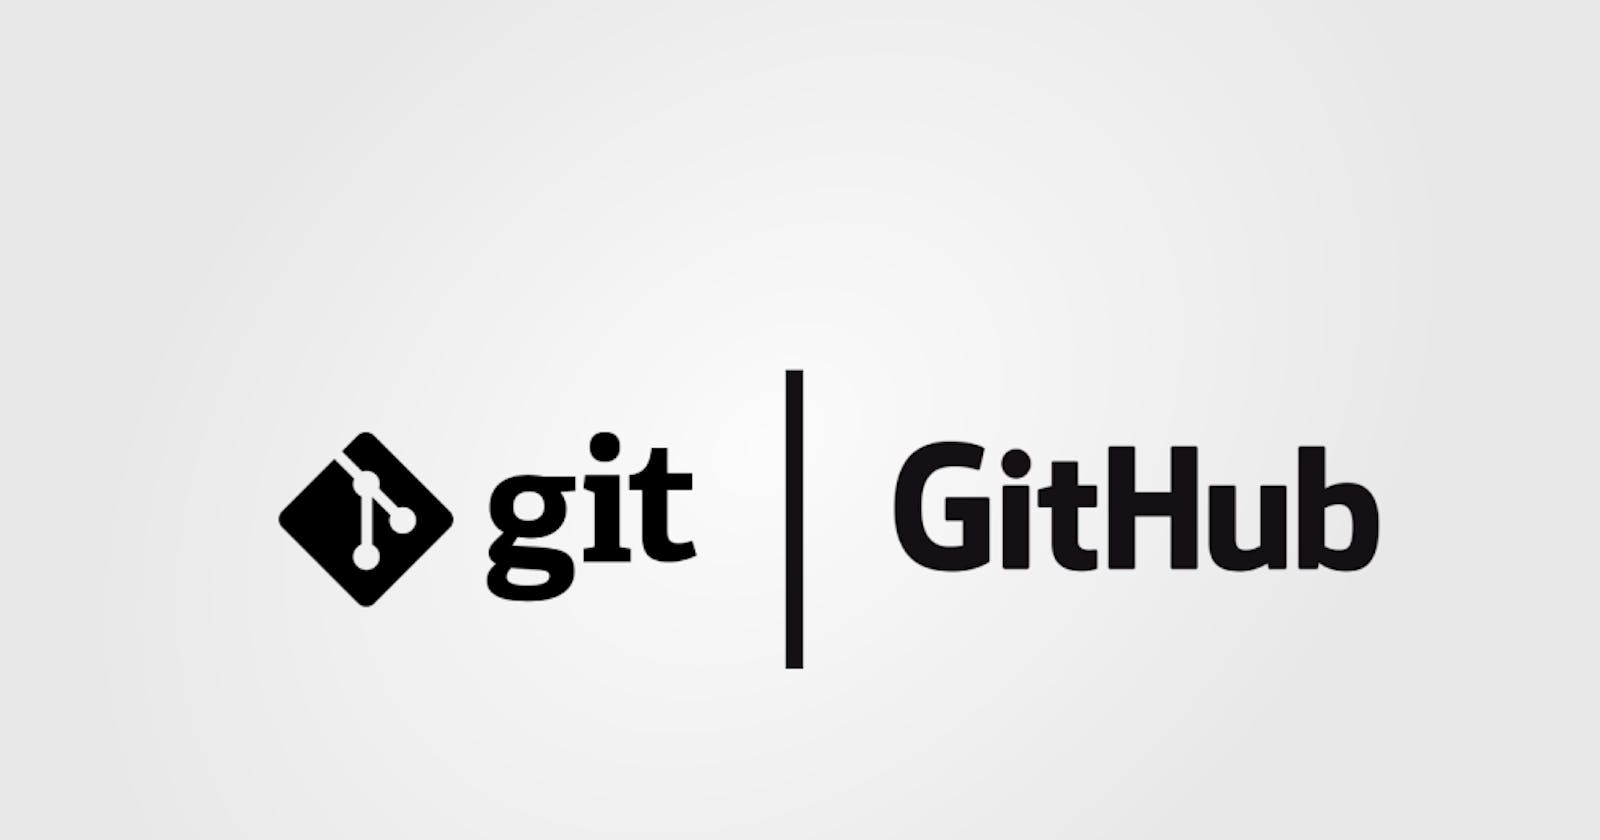 Working with Git Like a Senior Software Engineer